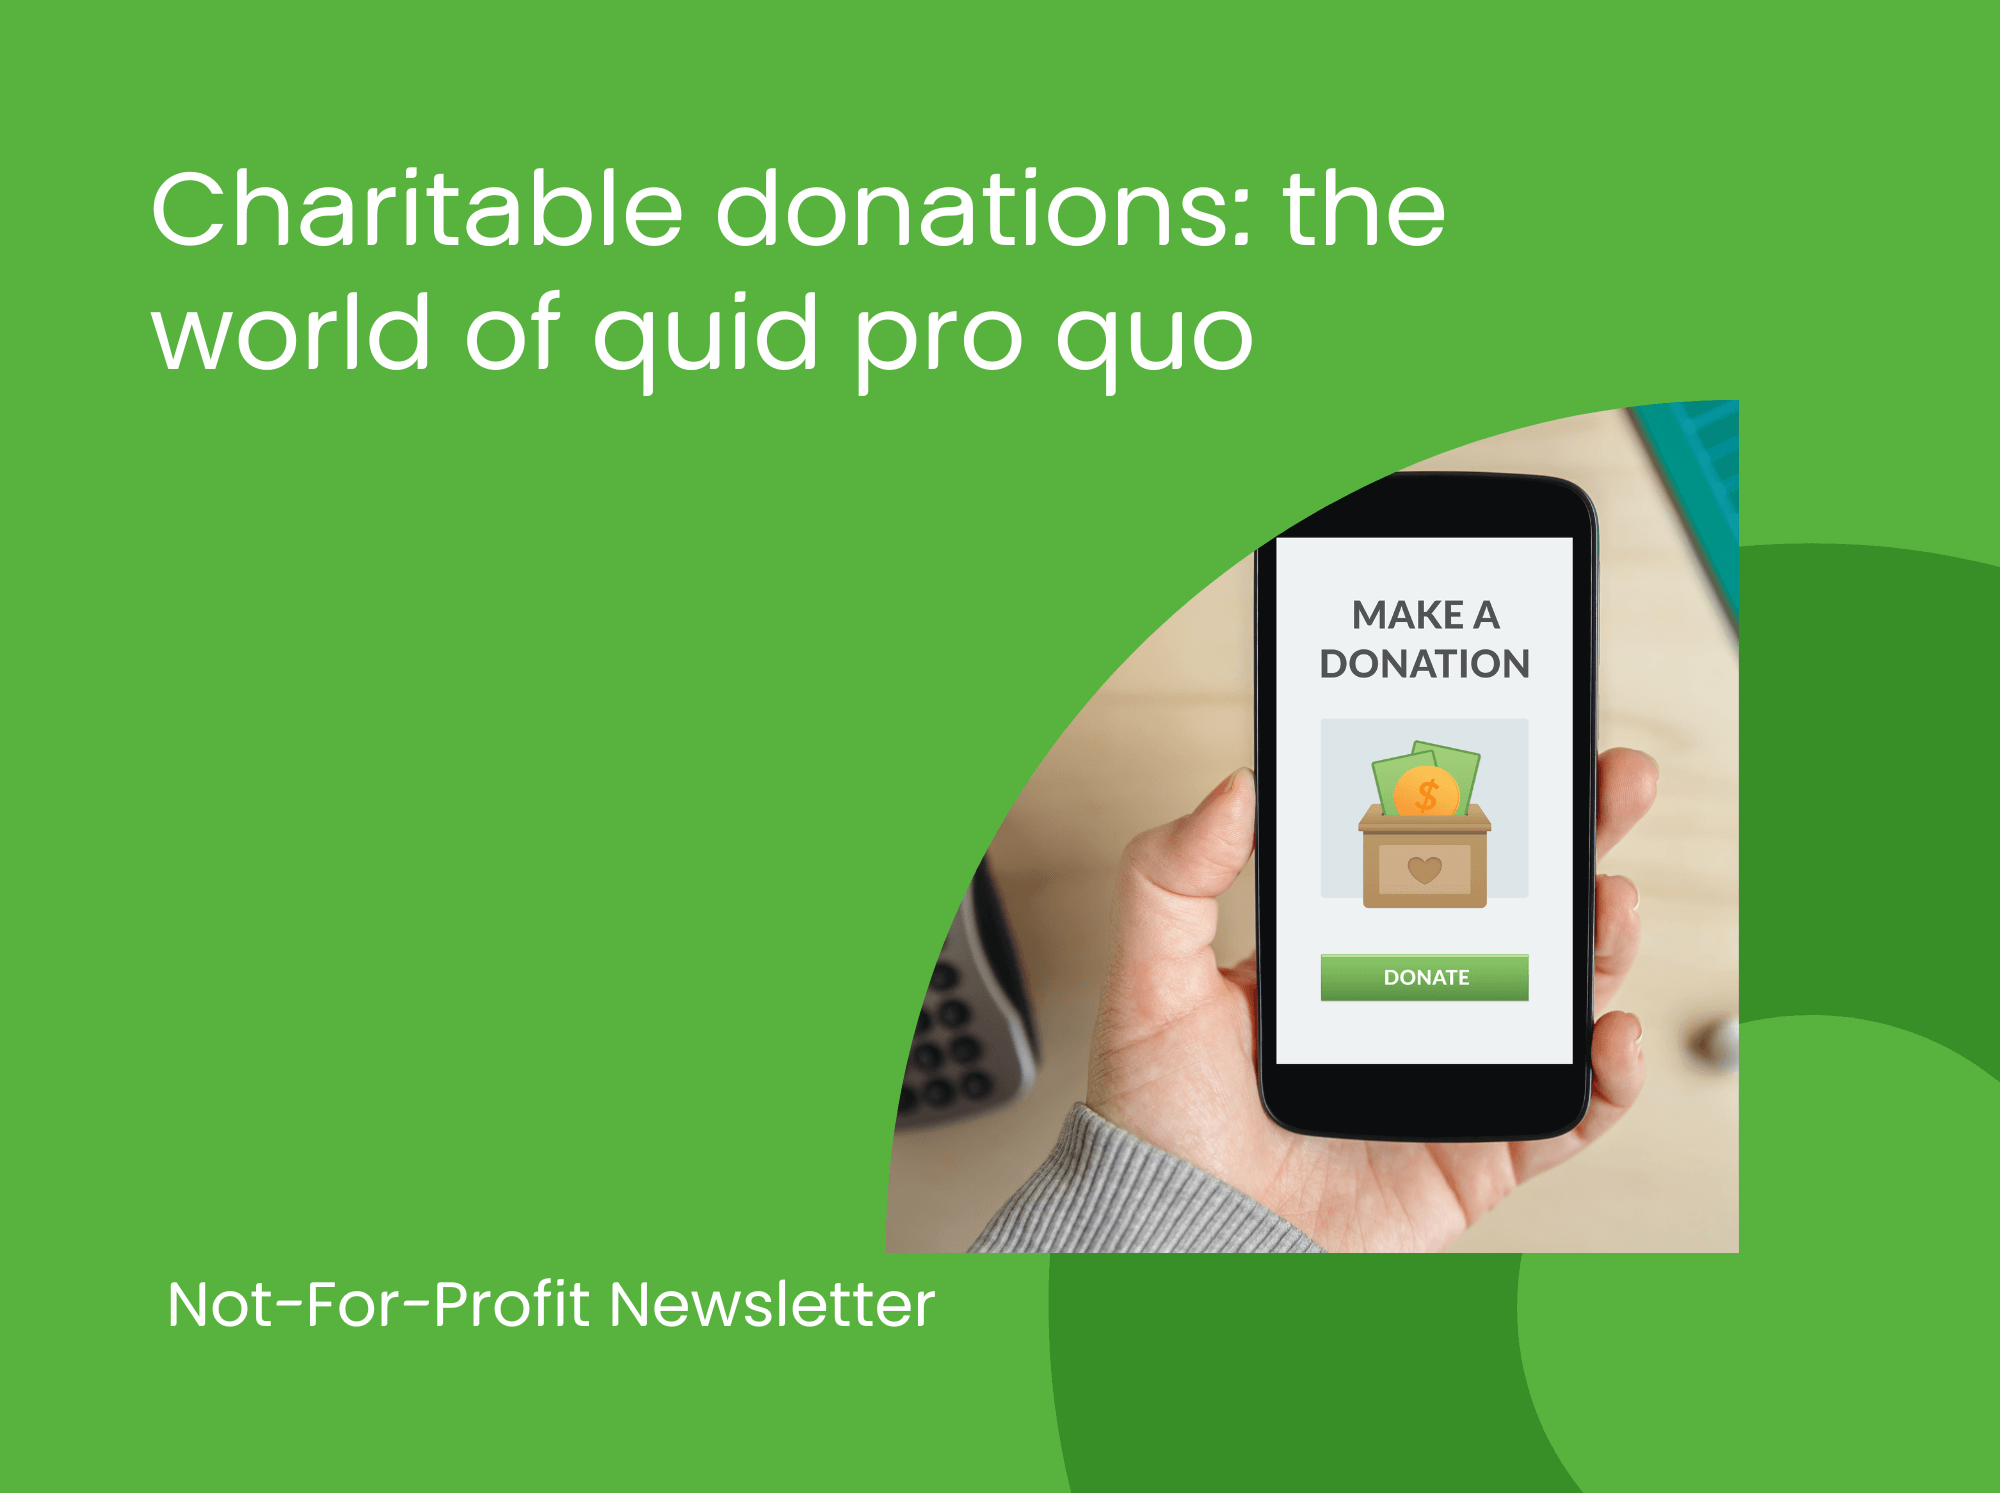 Charitable donations: the world of quid pro quo